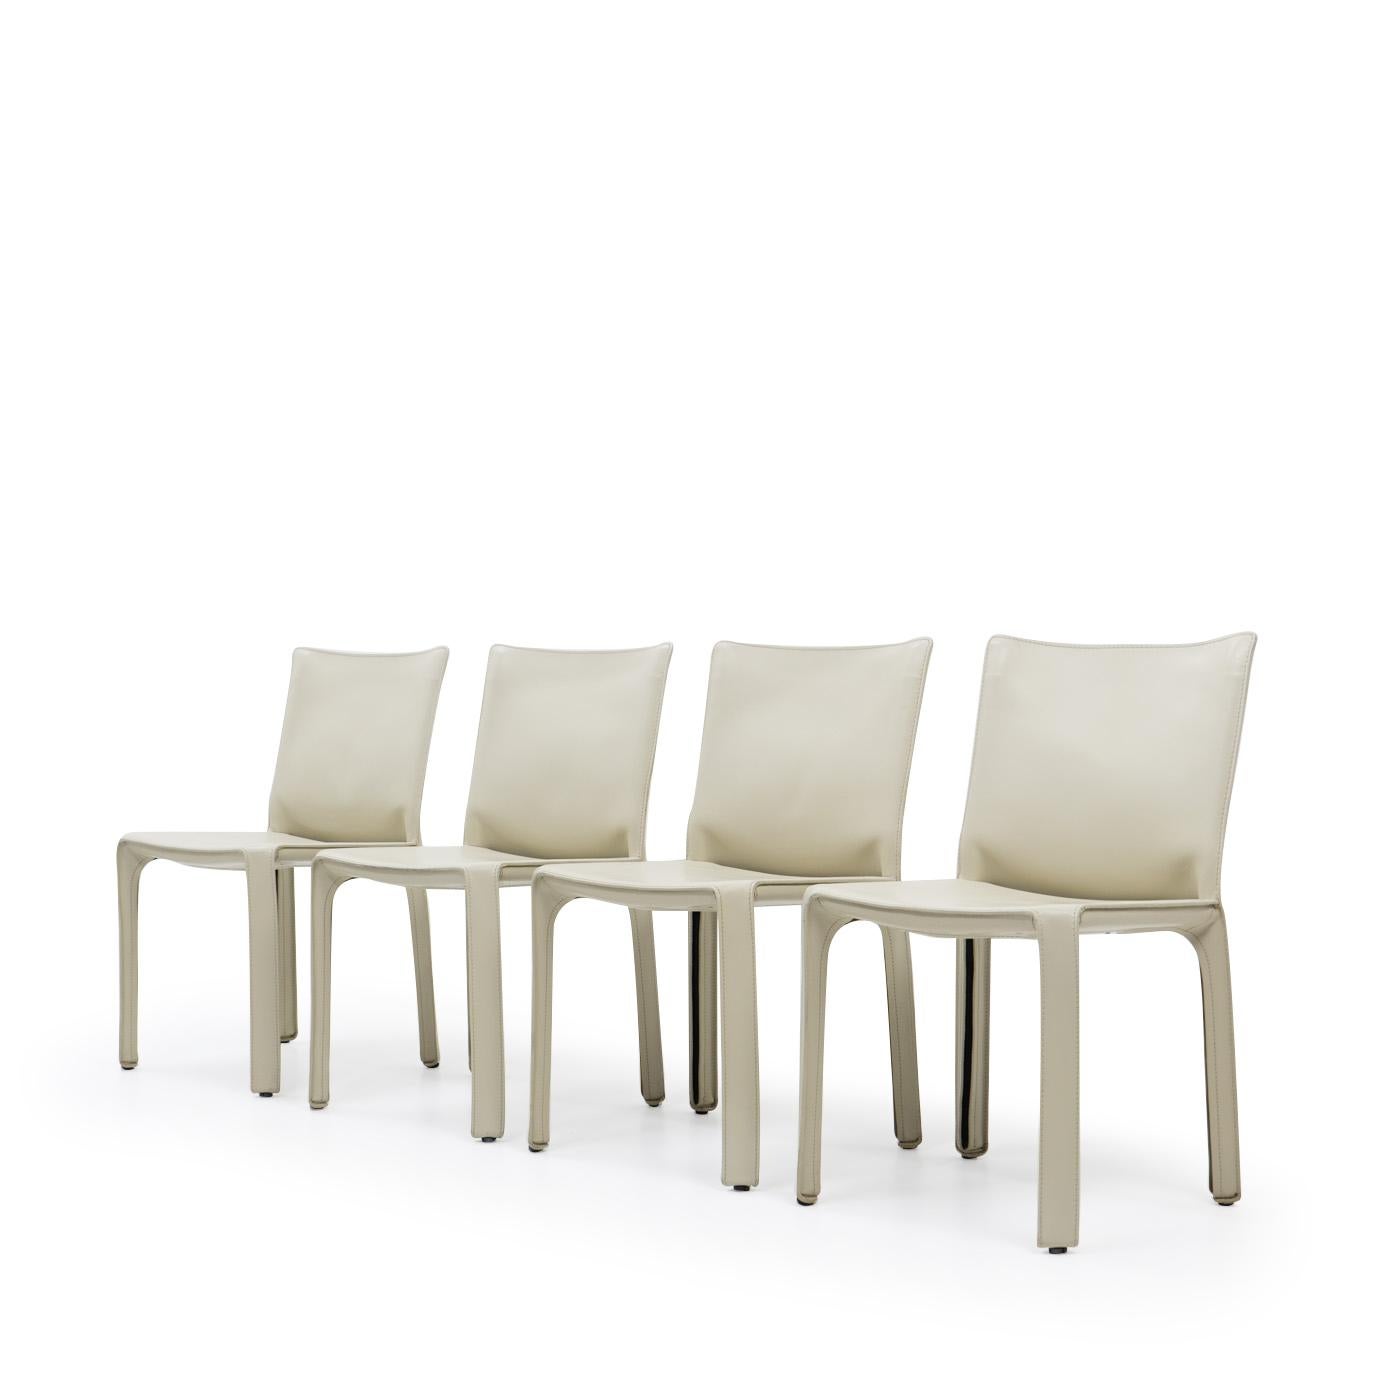 Set of four Cab 412 side chairs in cream leather by Mario Bellini for Cassina.

The Cab chair is built up as a tubular frame over which thick saddle leather is fitted; the leather skin is kept in place with zippers on the inside legs.

A wonderful